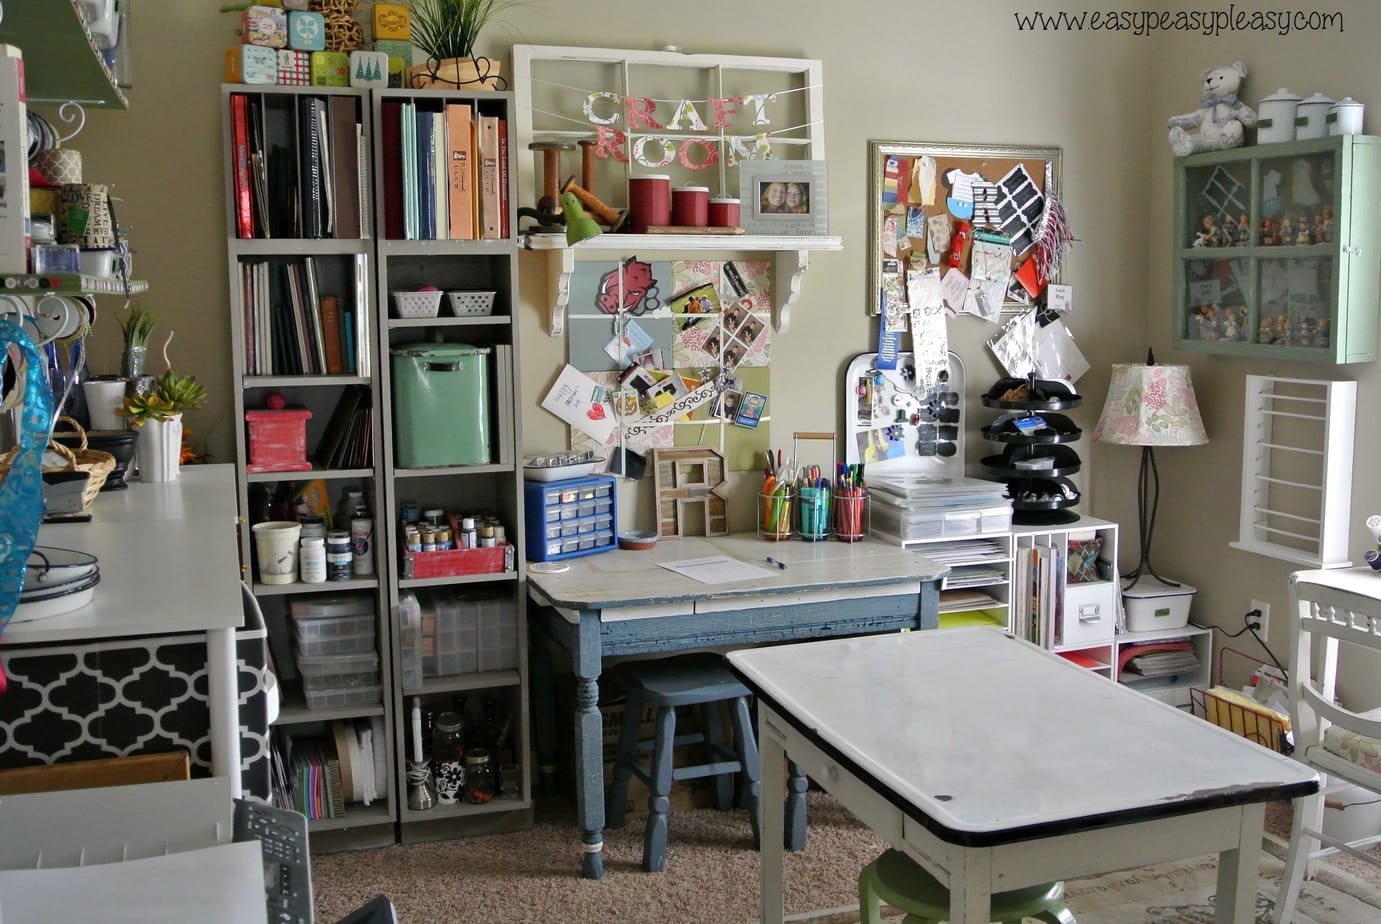 How To Organize A Room With Free Printable - Easy Peasy Pleasy